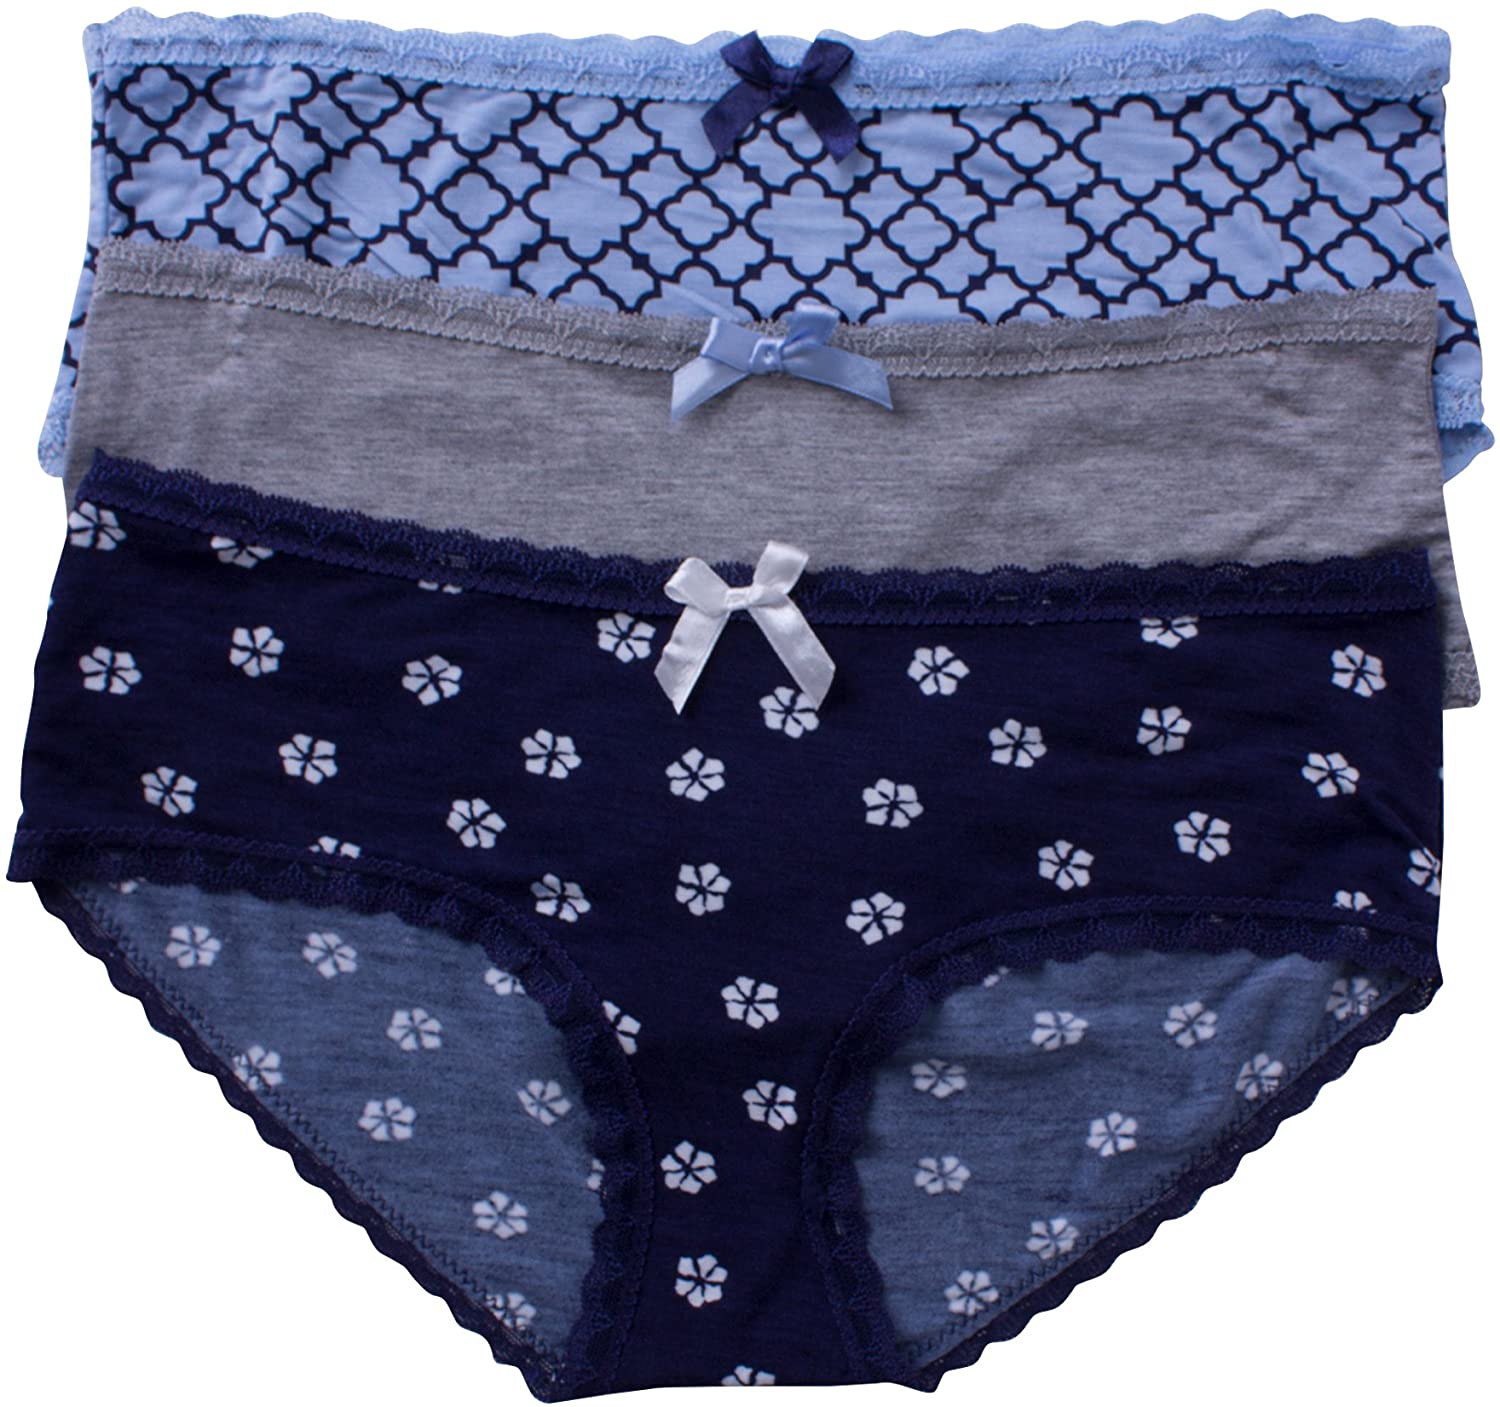 Price:$9.99 Nanette Lepore Womens Lace Underwear Multi Pack at Amazon Women’s Clothing store